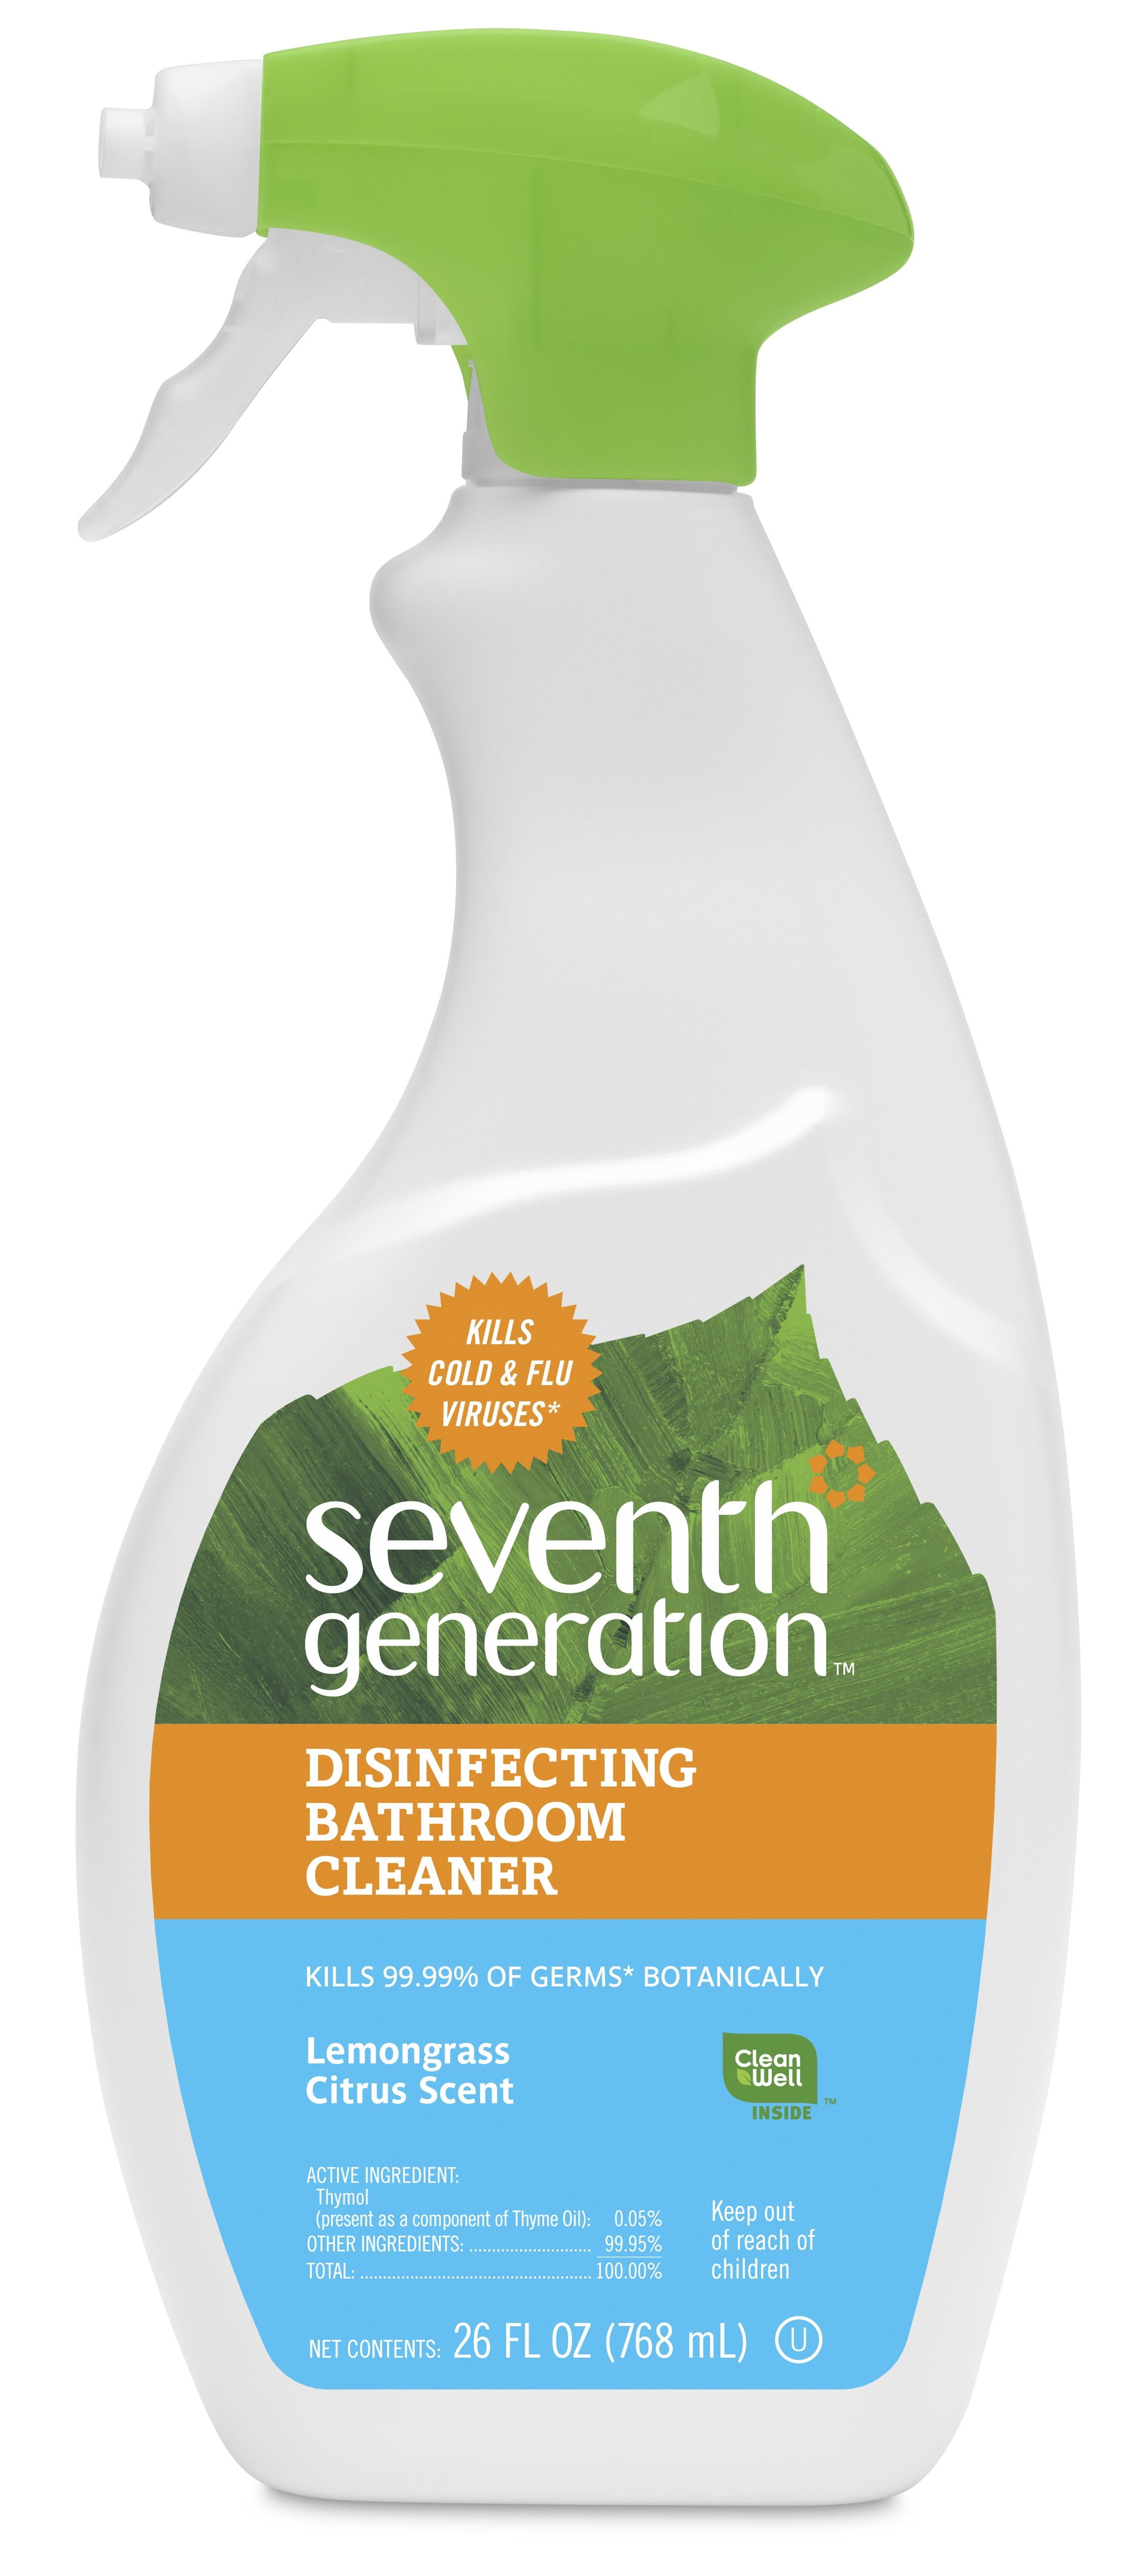 17 Disinfecting and Cleaning Supplies You Can Buy Online